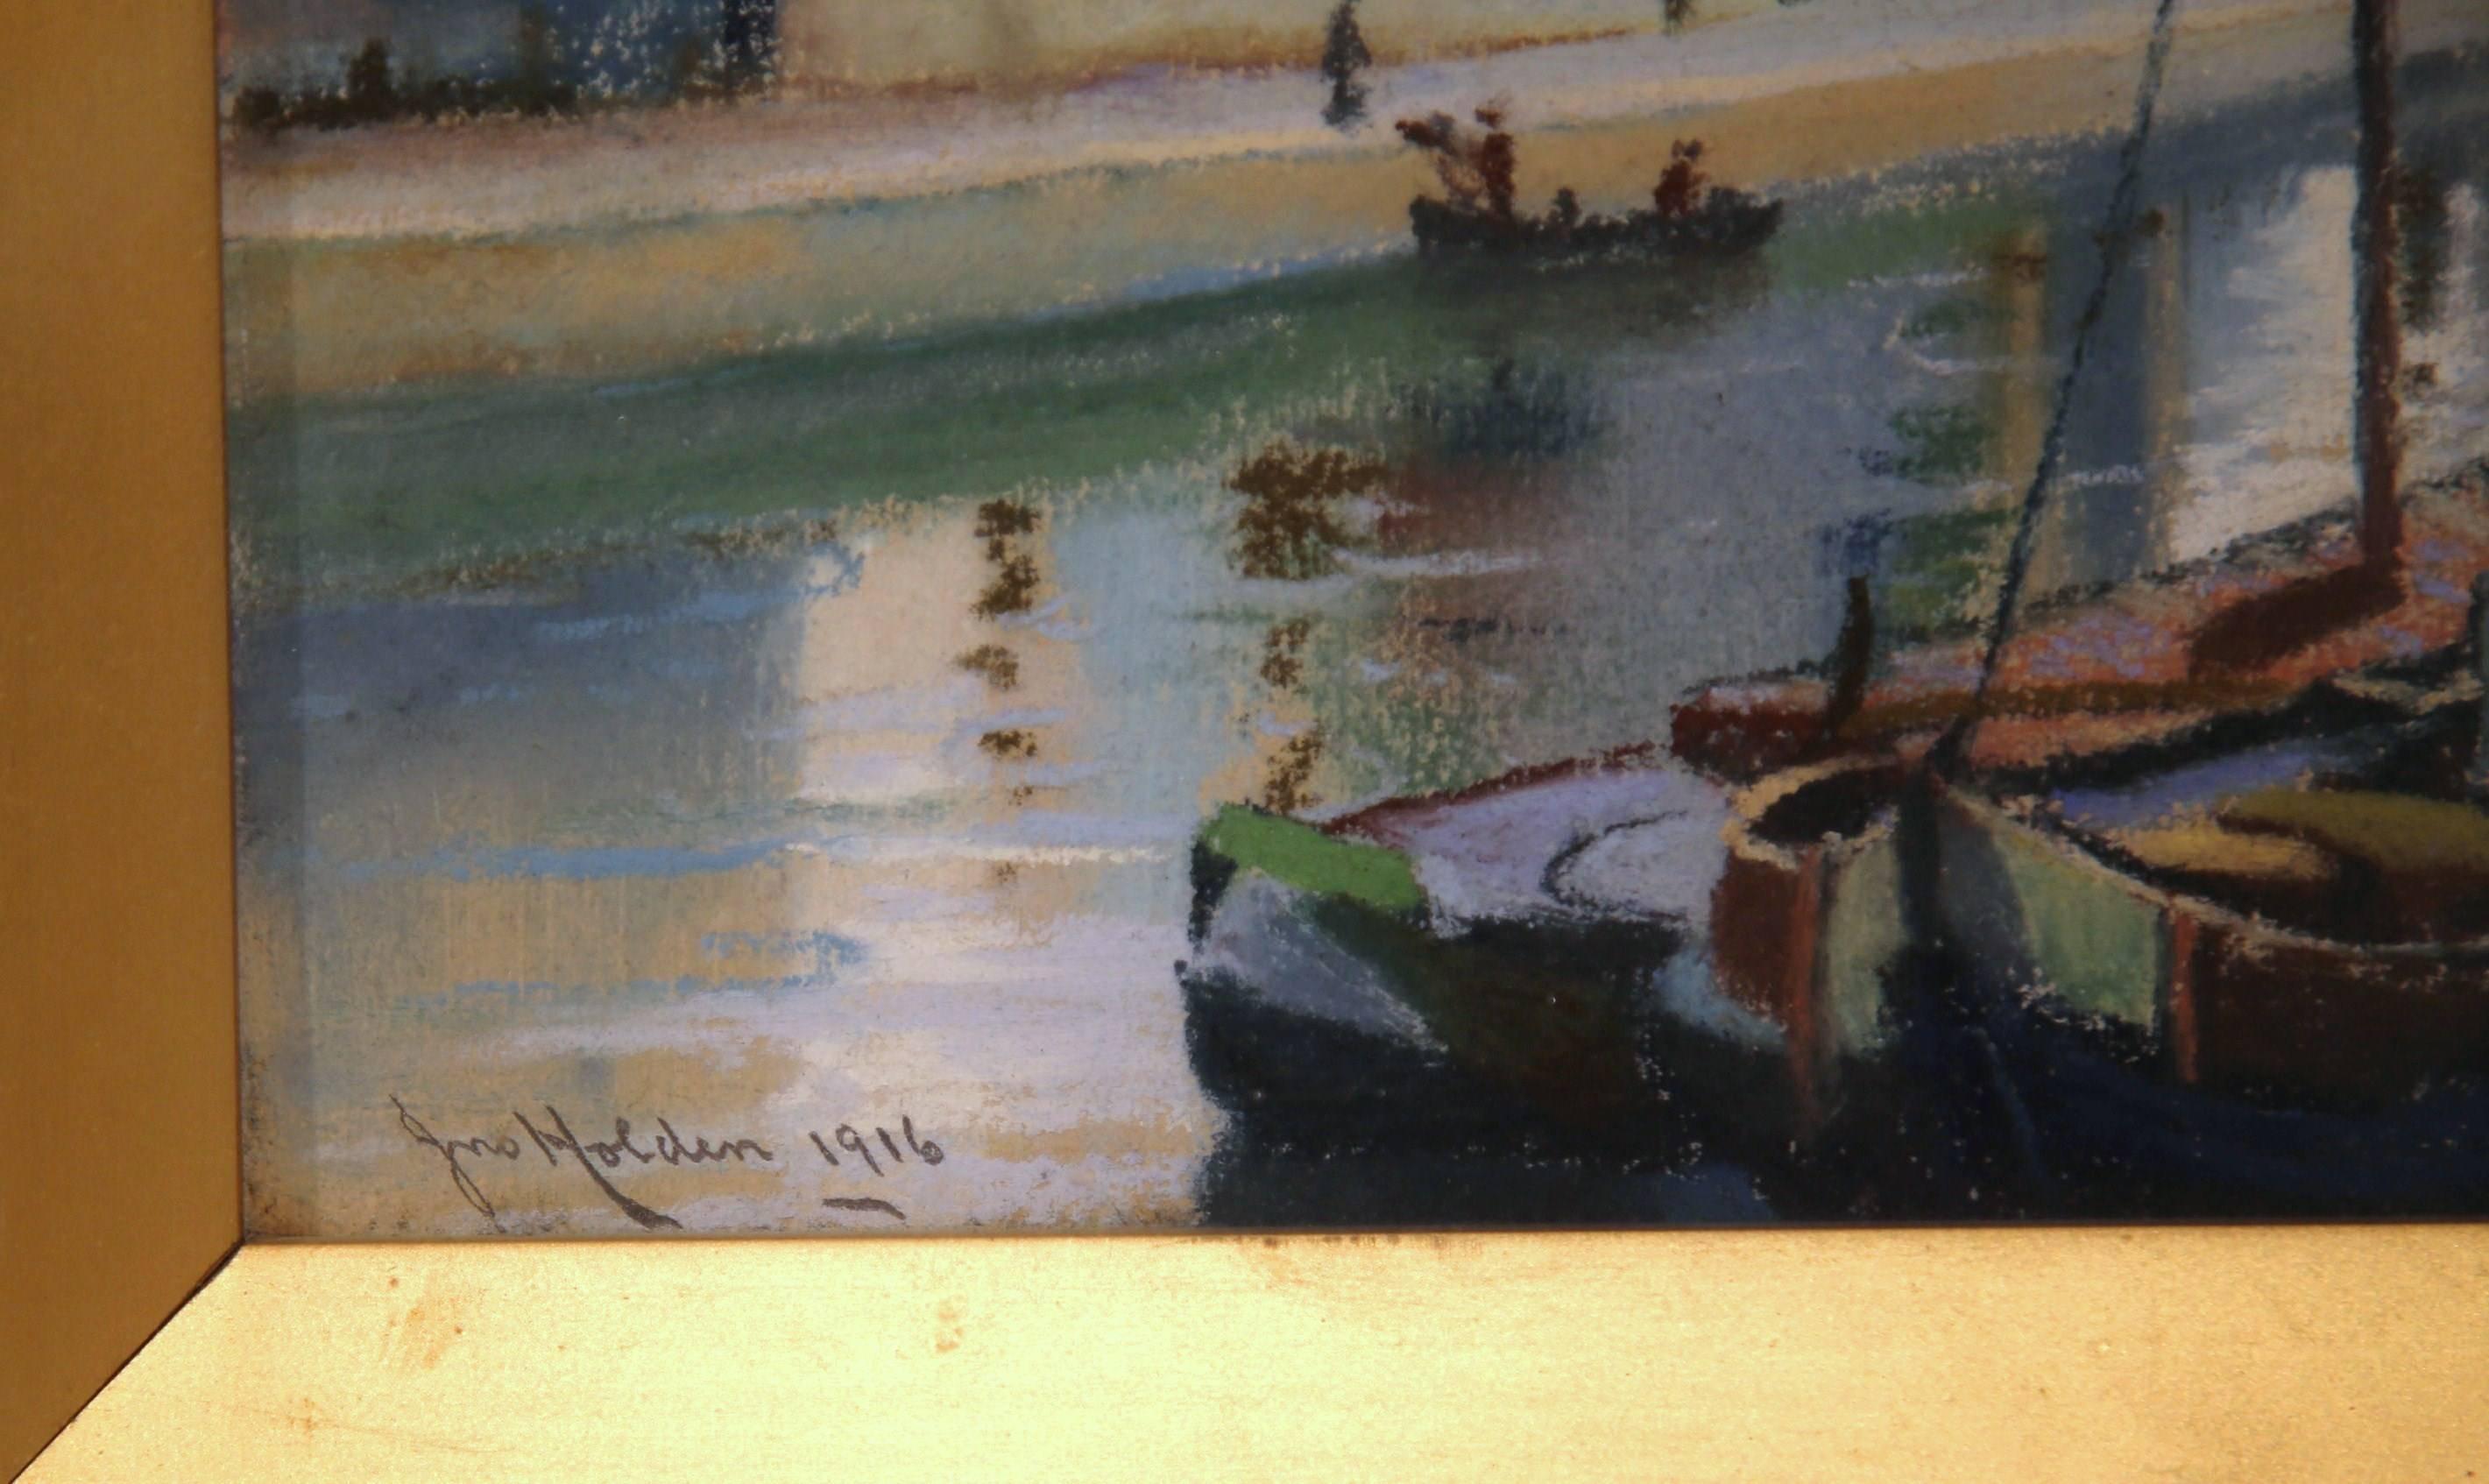 This fine pair of antique watercolors was painted in England, and is signed and dated Holden, 1916. The compositions show two cityscapes situated on a river. The color palette is soft and neutral, and the pieces are covered with clear glass. The